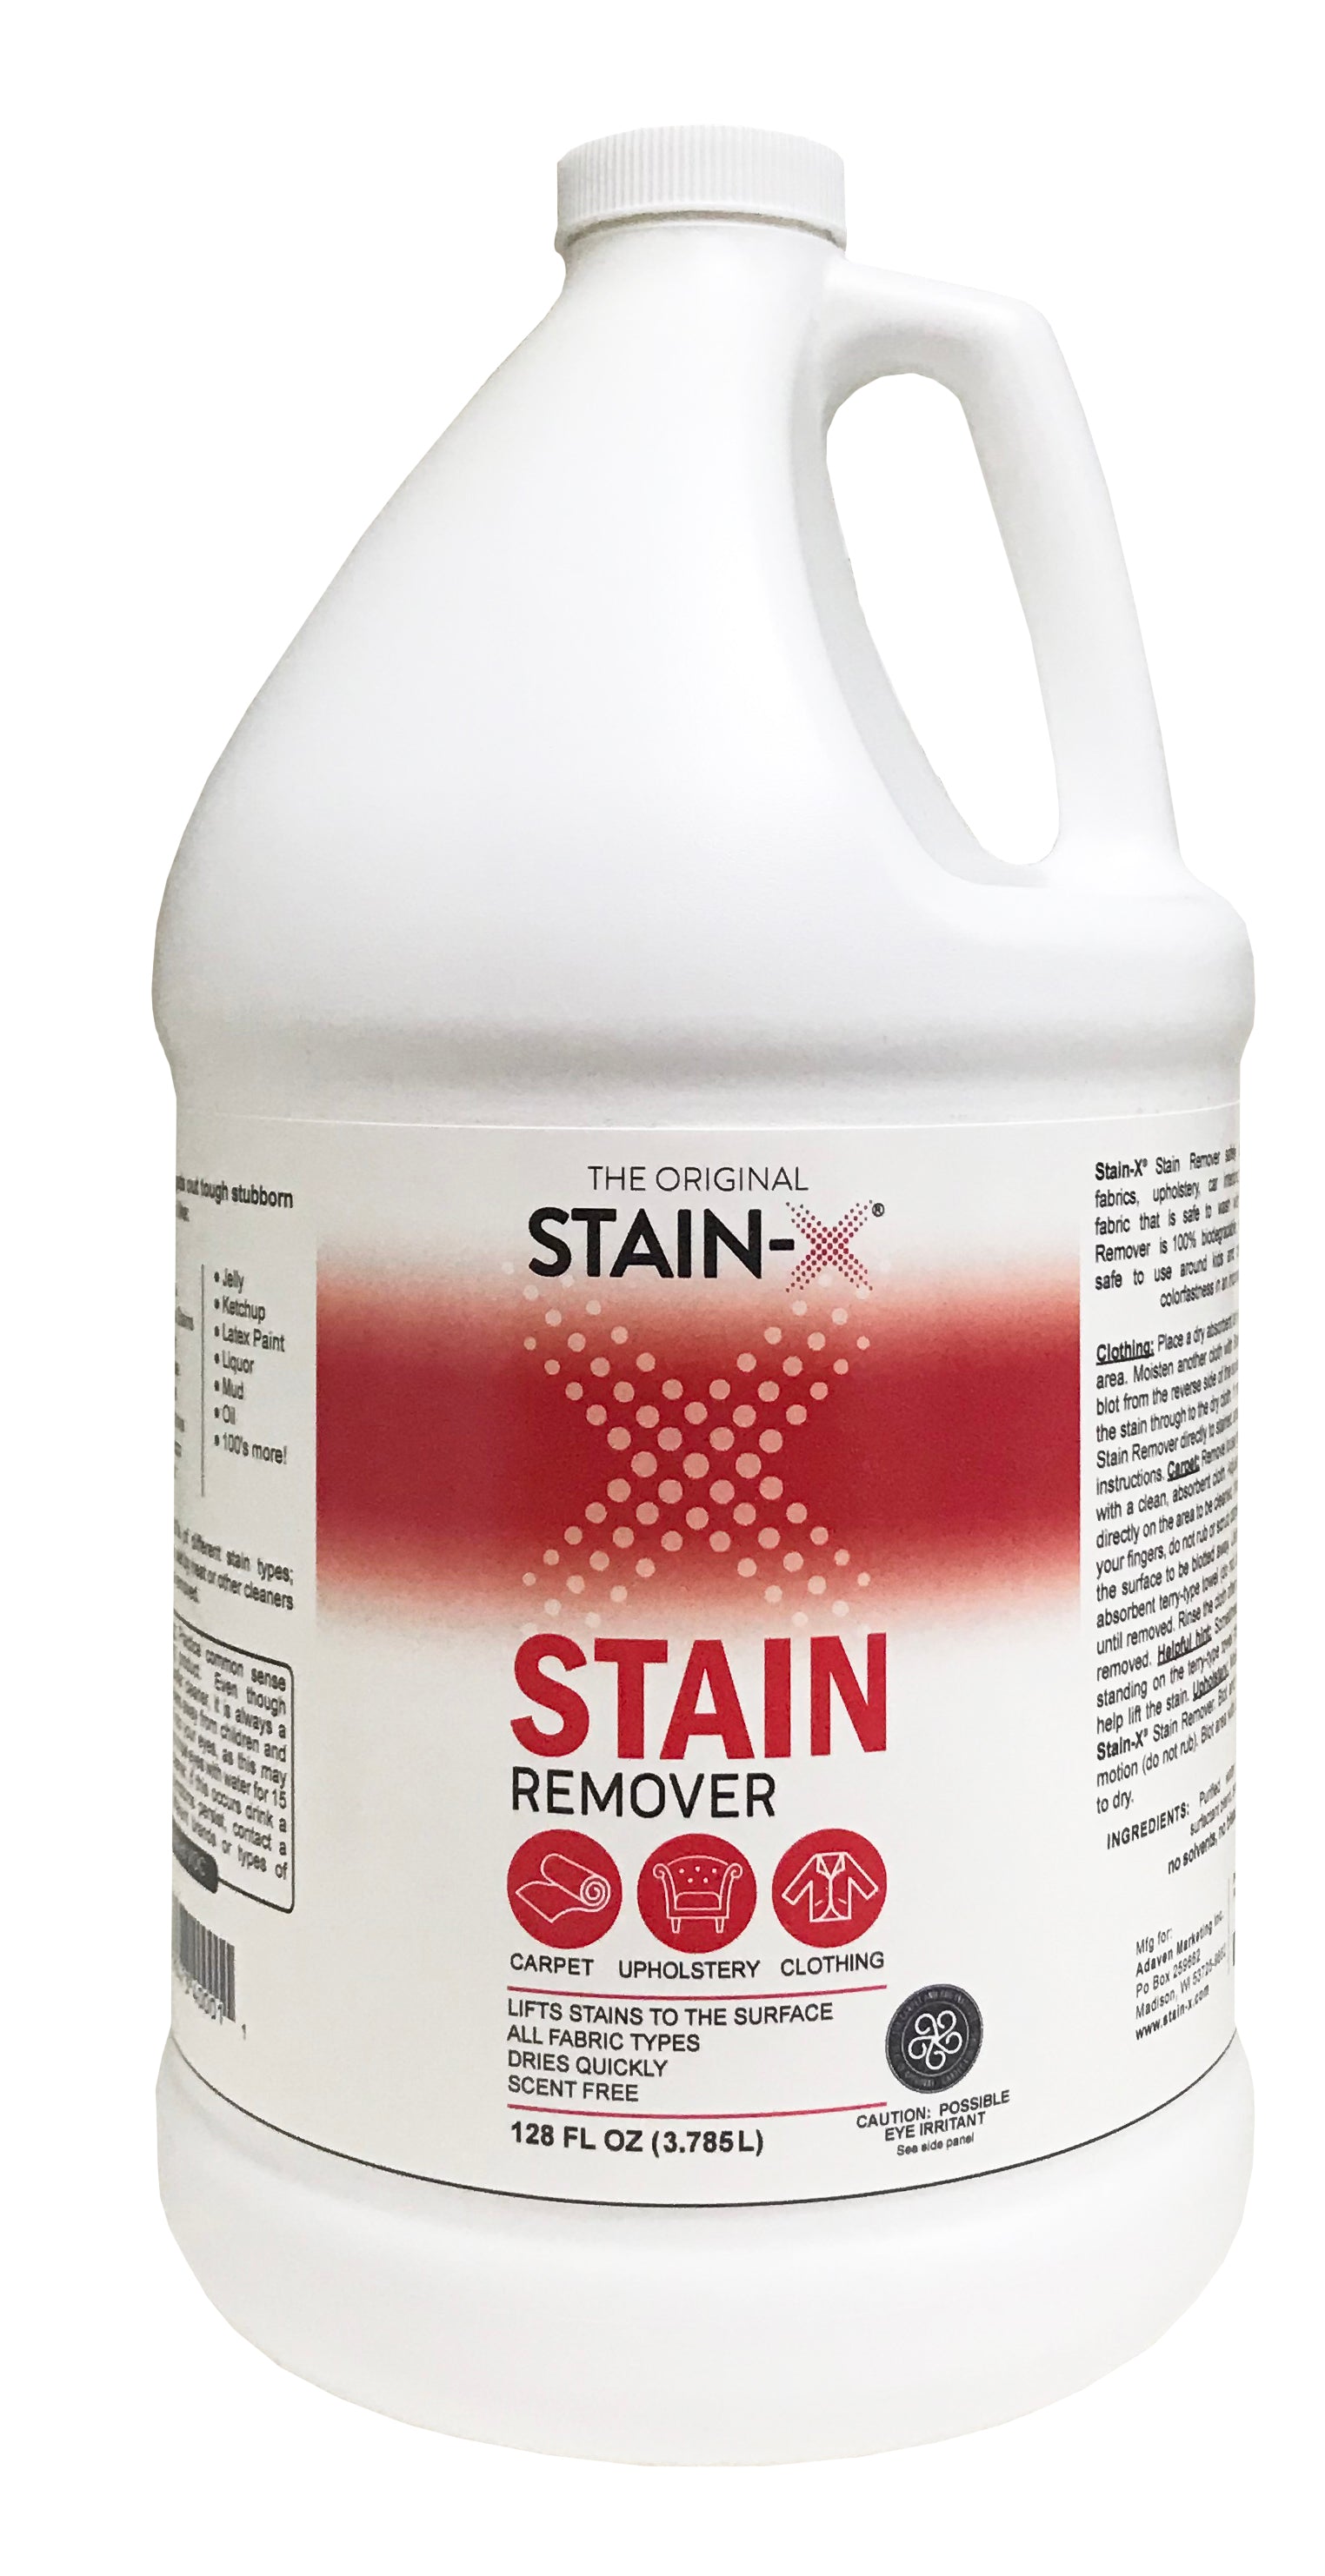 Stain-X Stain Remover Gallon